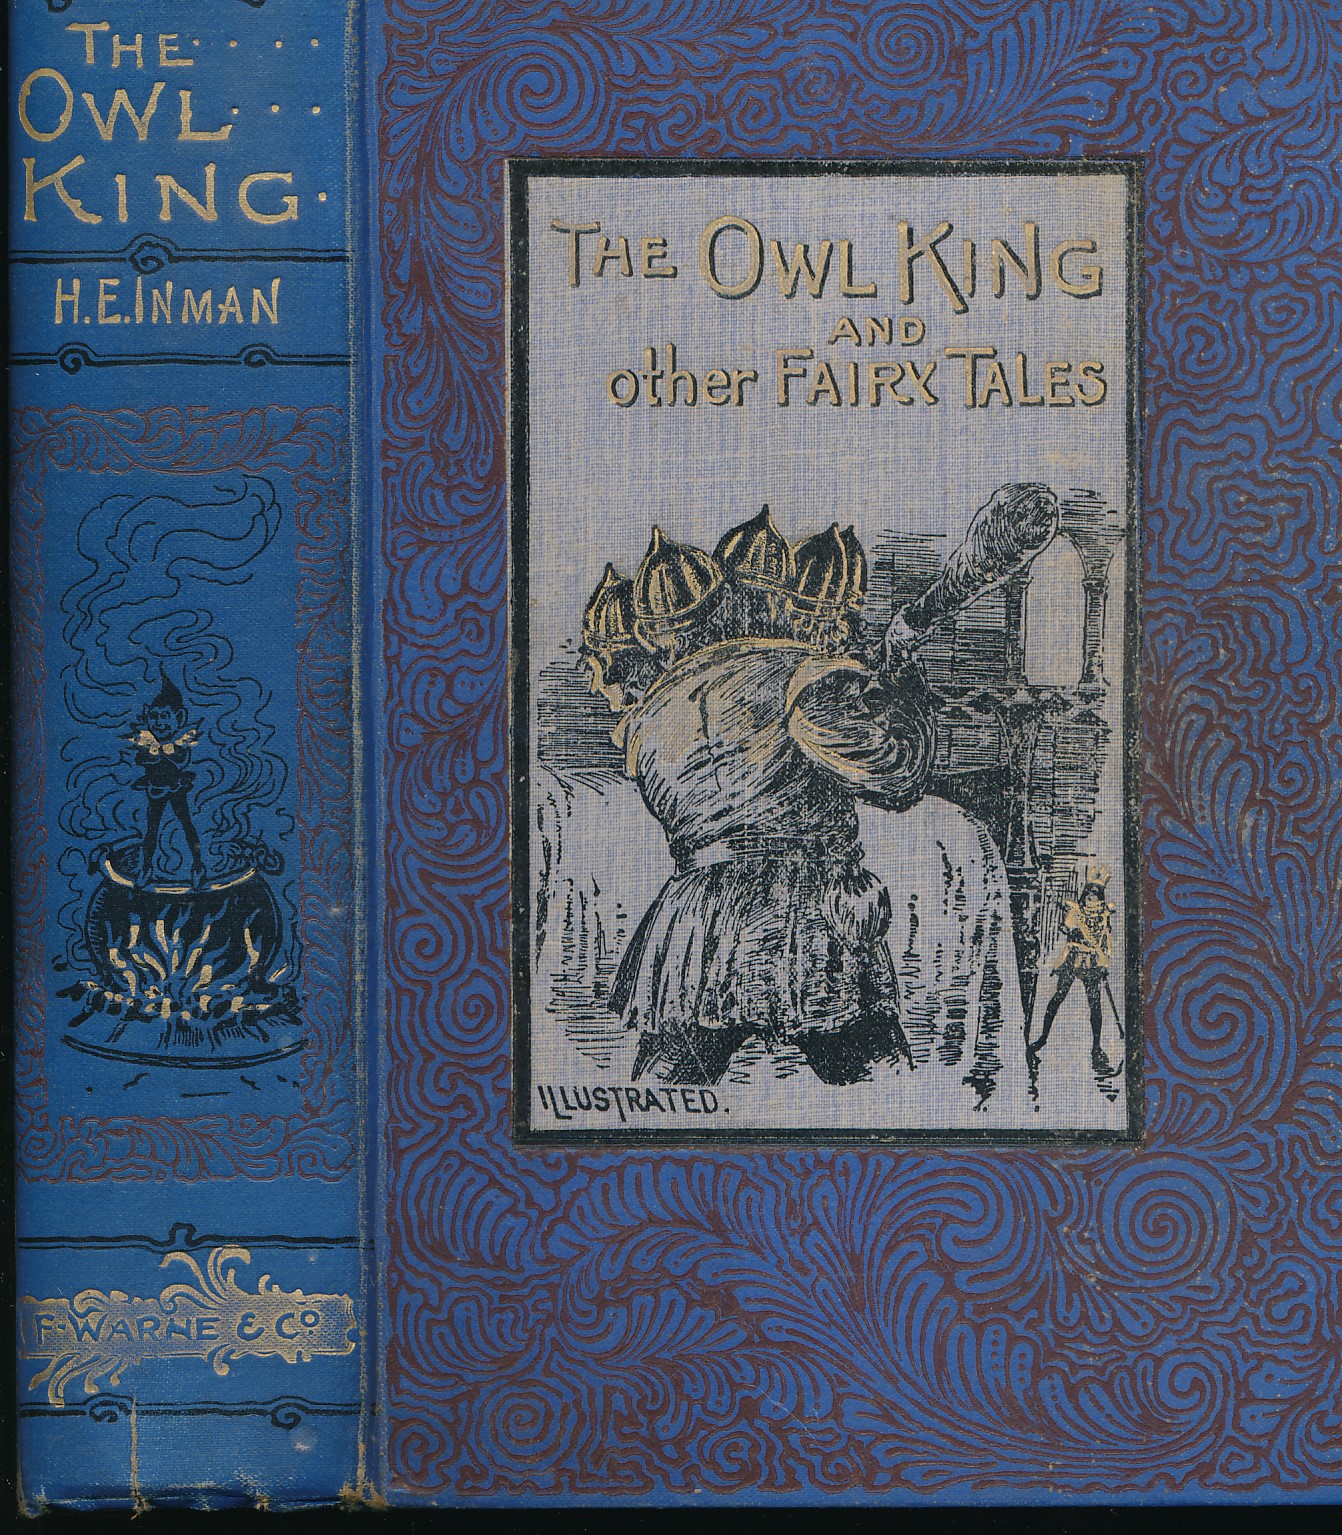 The Owl King and Other Fairy Tales